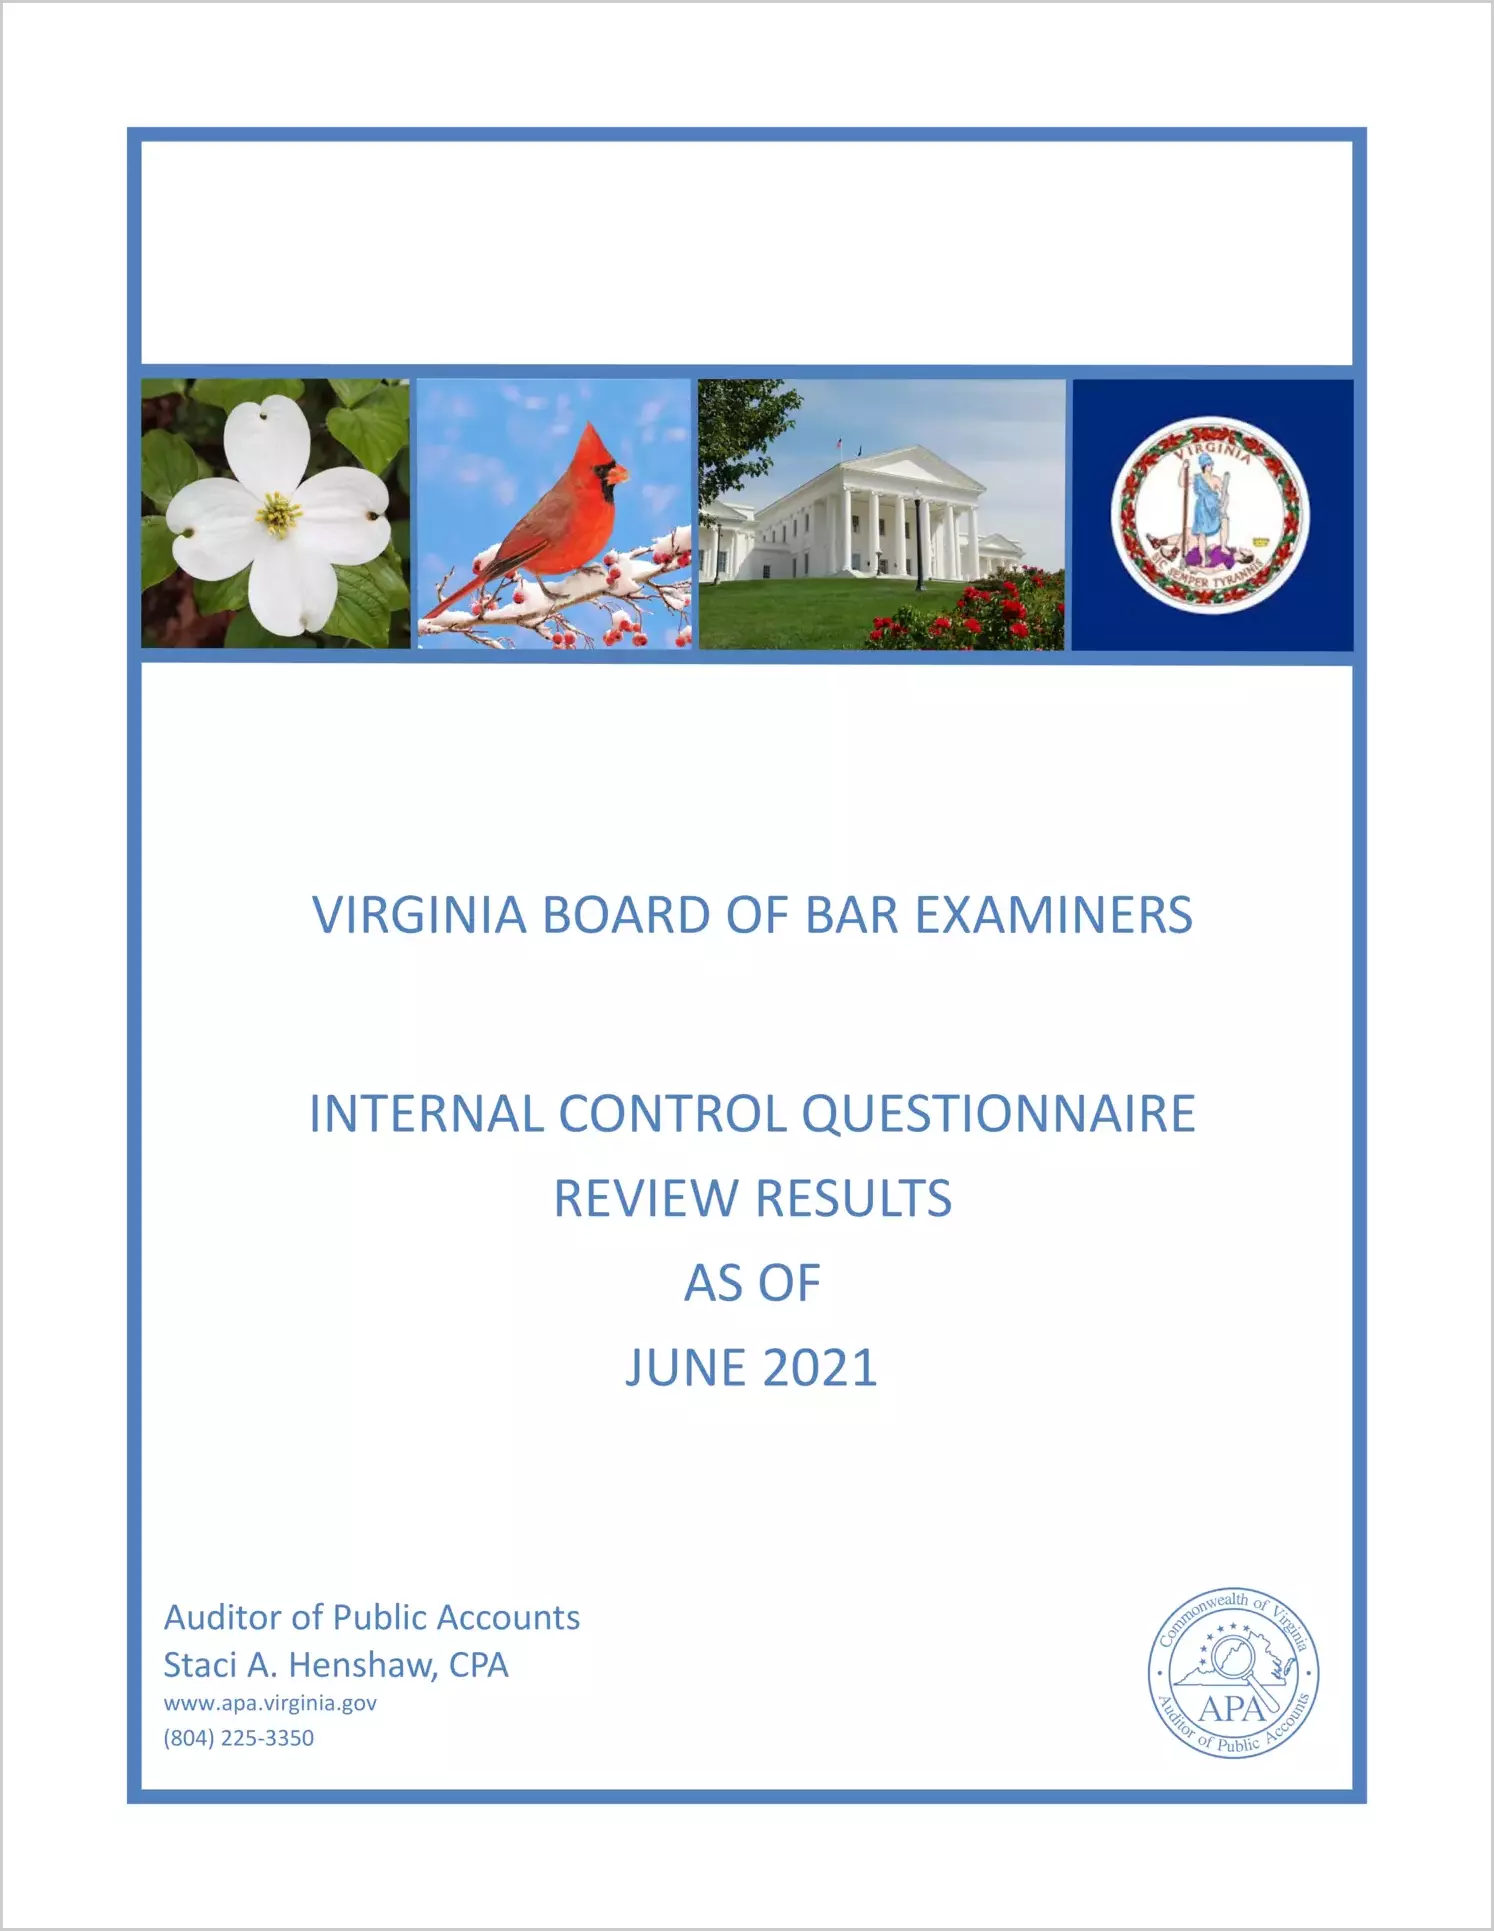 Virginia Board of Bar Examiners Internal Control Questionnaire Review Results as of June 2021